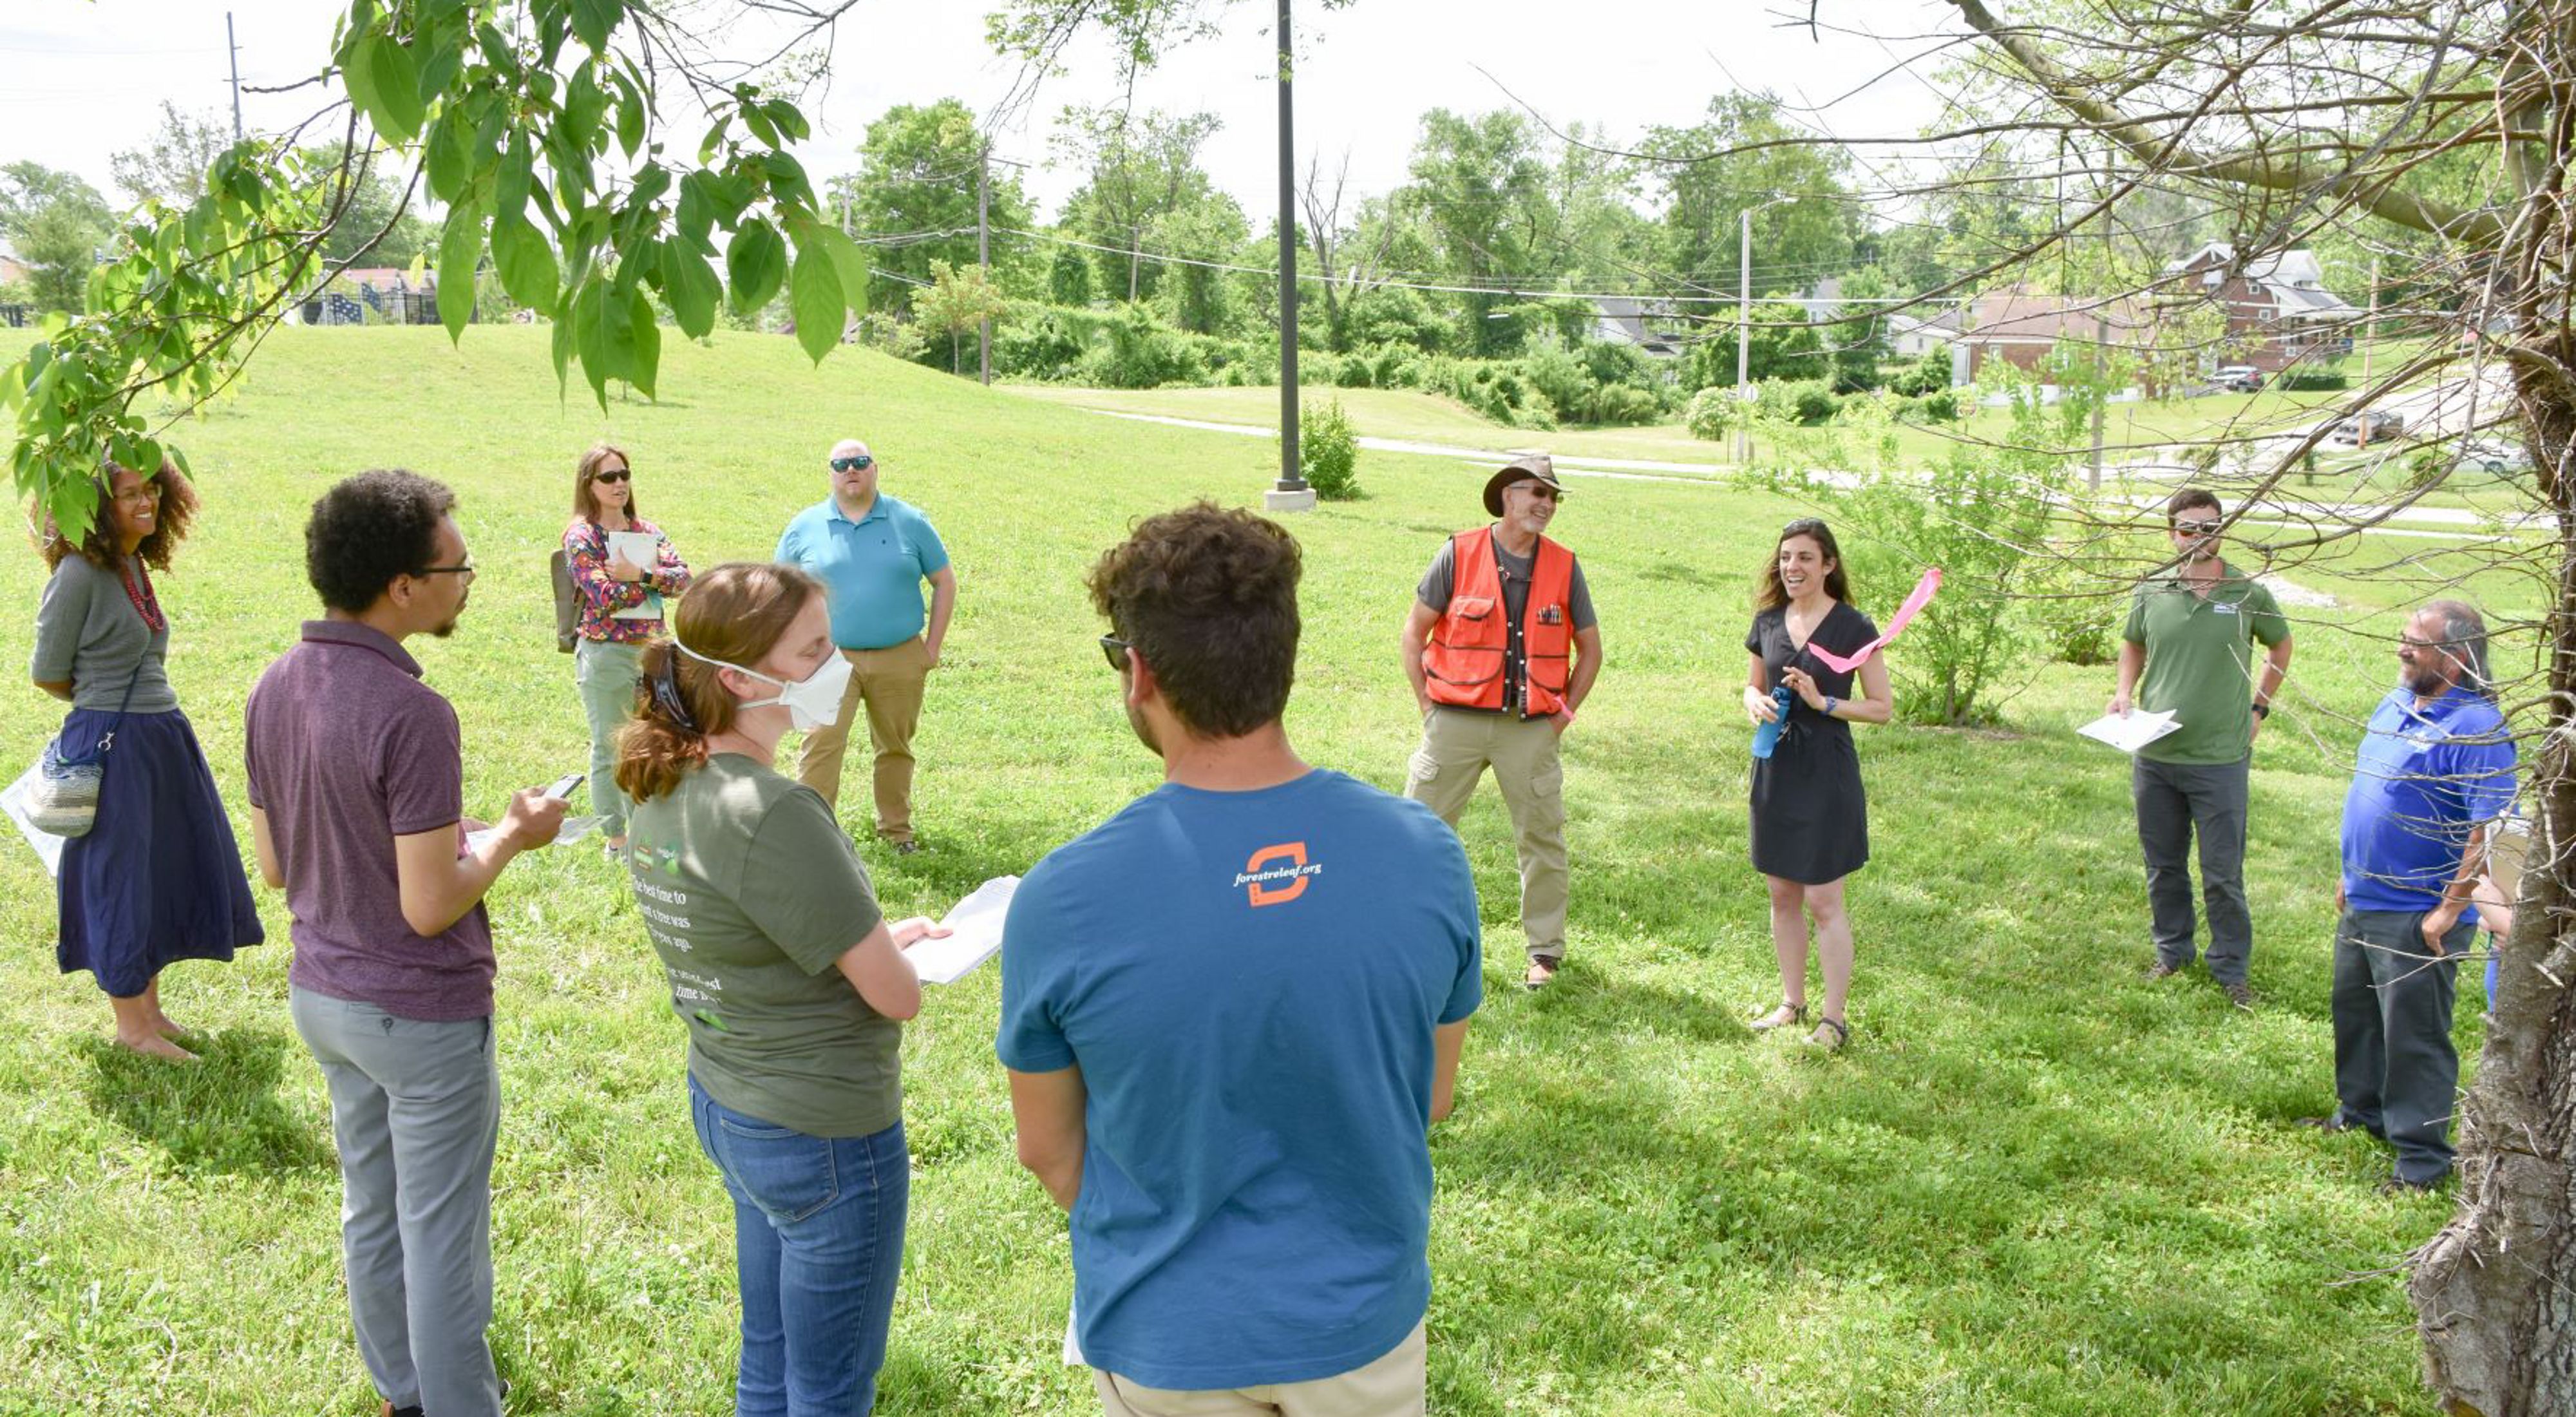 A small group of individuals gather in an outdoor lot to listen to a speaker.